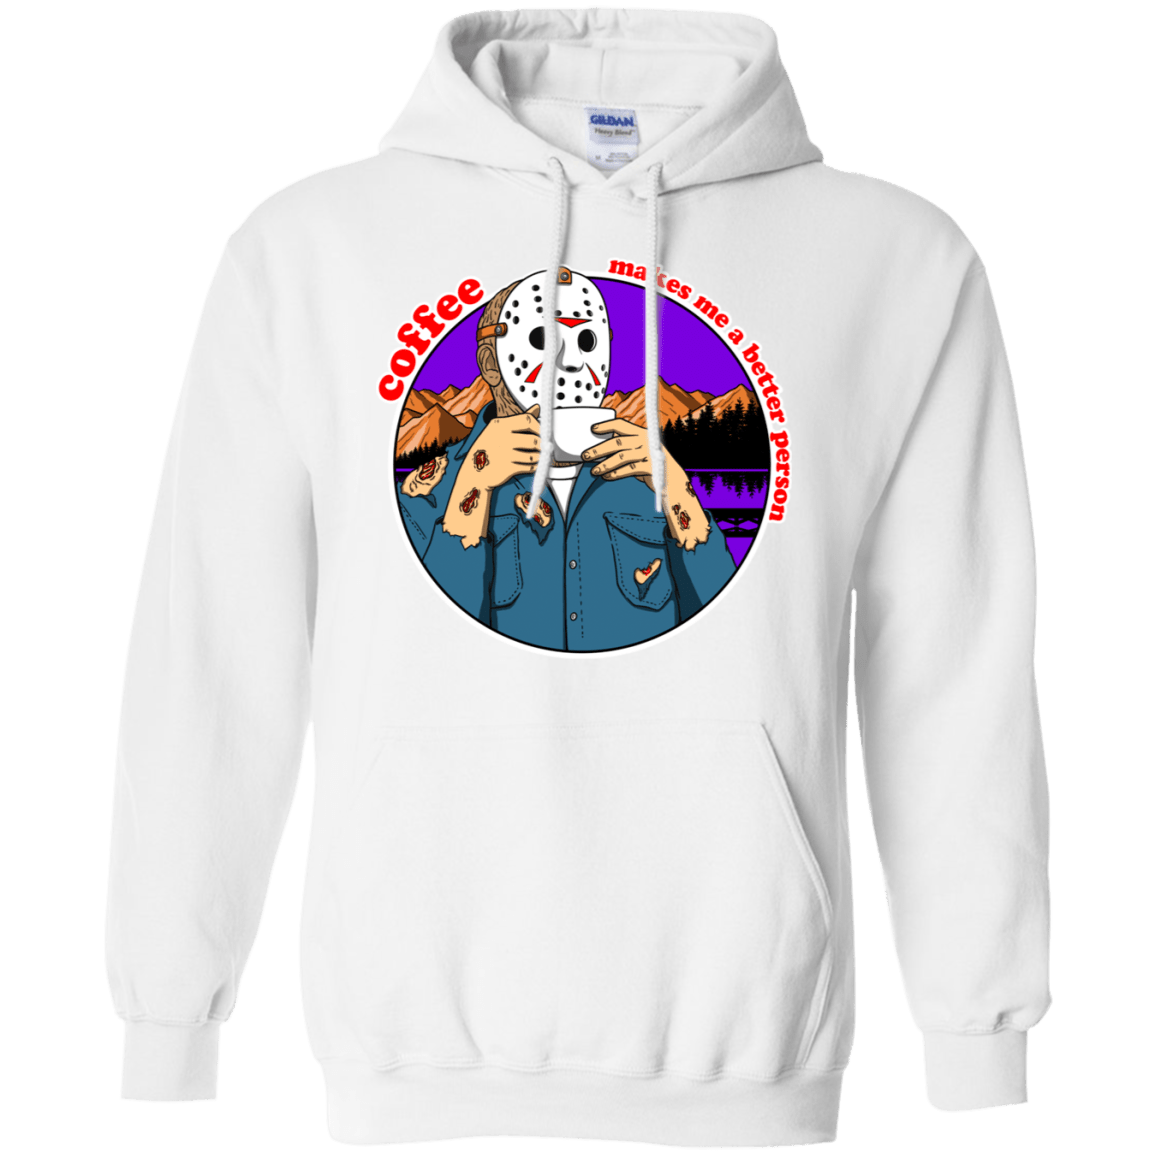 Sweatshirts White / S Coffee Makes Me Better Pullover Hoodie